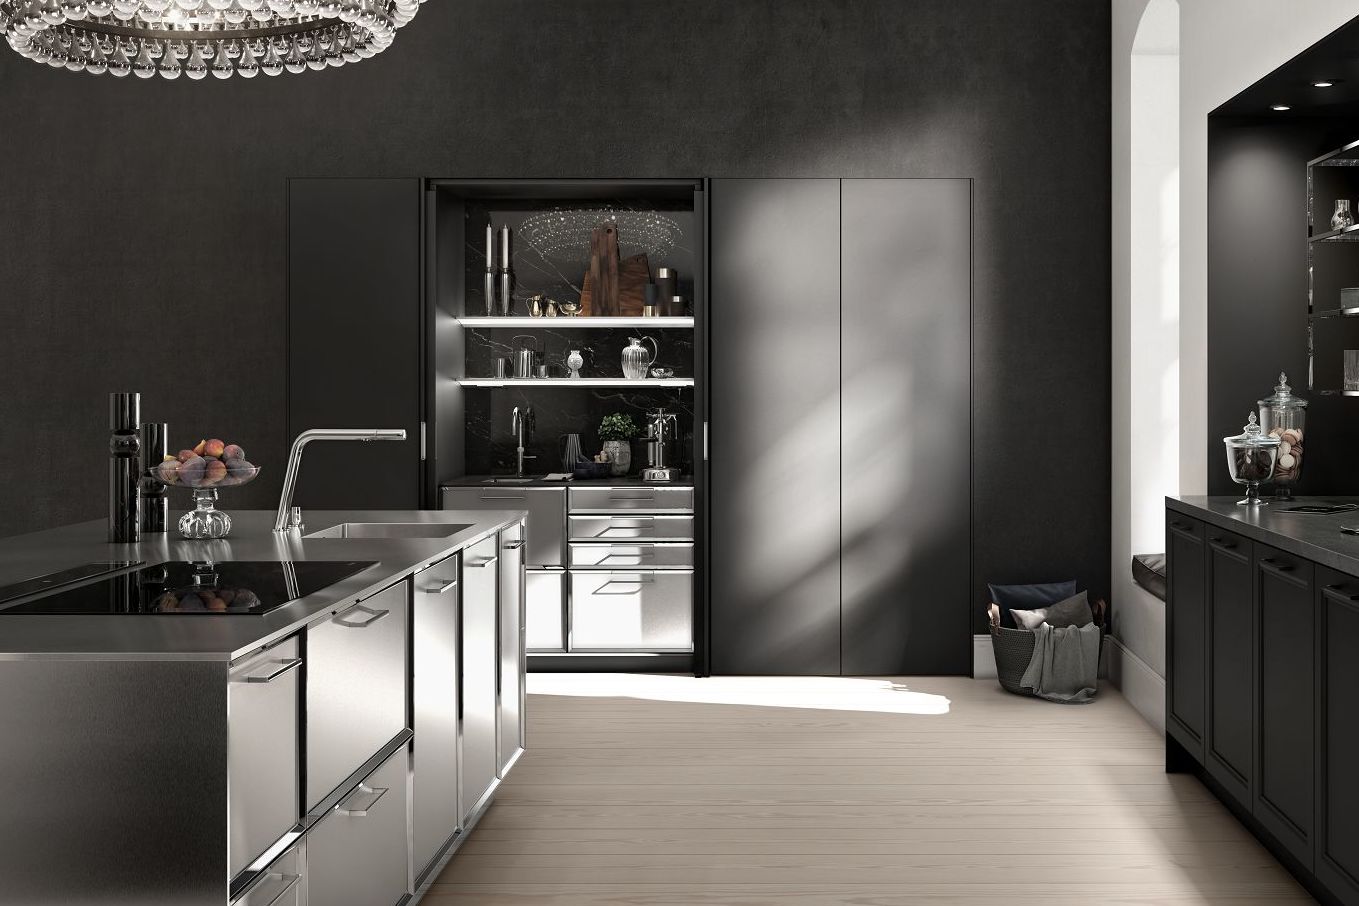 SieMatic Classic BeauxArts SE kitchen island with faceted door fronts and extensive stainless steel